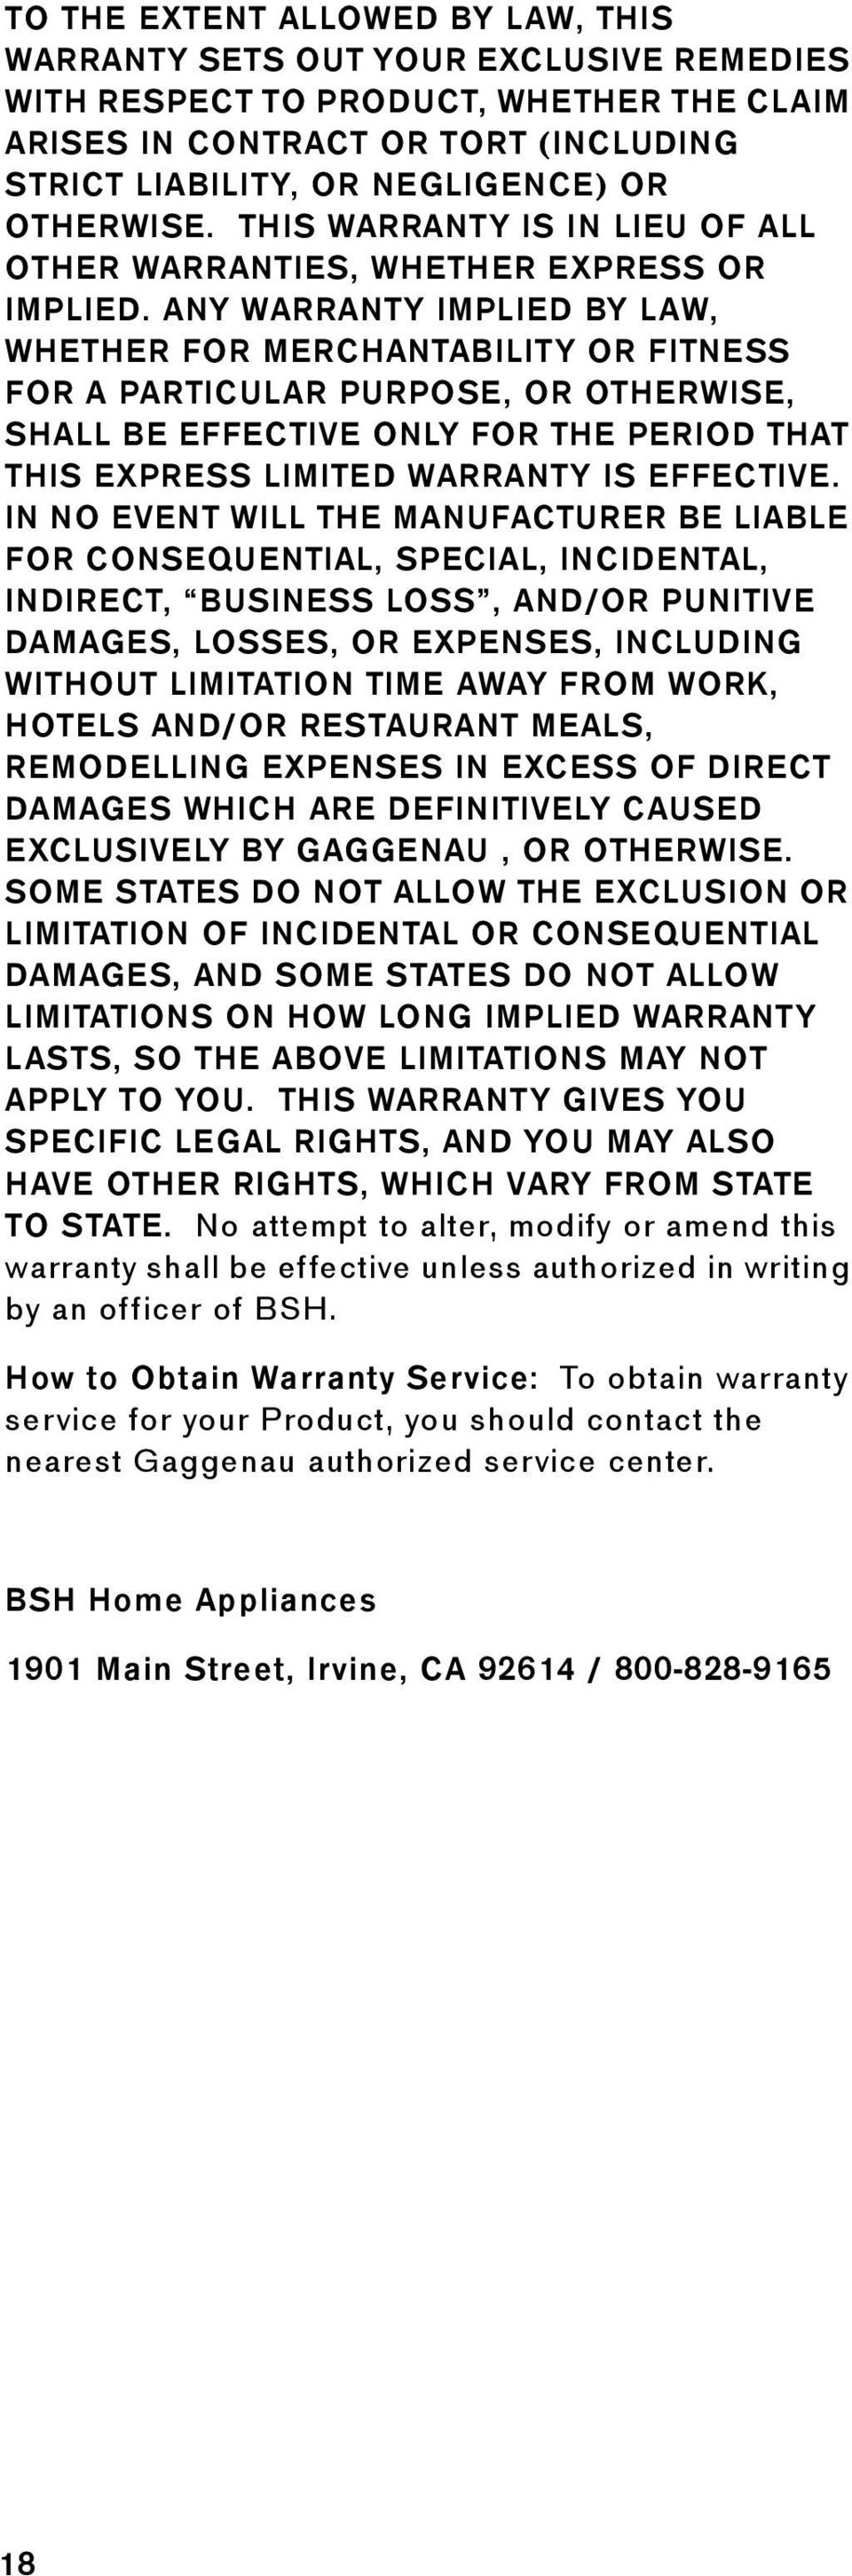 ANY WARRANTY IMPLIED BY LAW, WHETHER FOR MERCHANTABILITY OR FITNESS FOR A PARTICULAR PURPOSE, OR OTHERWISE, SHALL BE EFFECTIVE ONLY FOR THE PERIOD THAT THIS EXPRESS LIMITED WARRANTY IS EFFECTIVE.